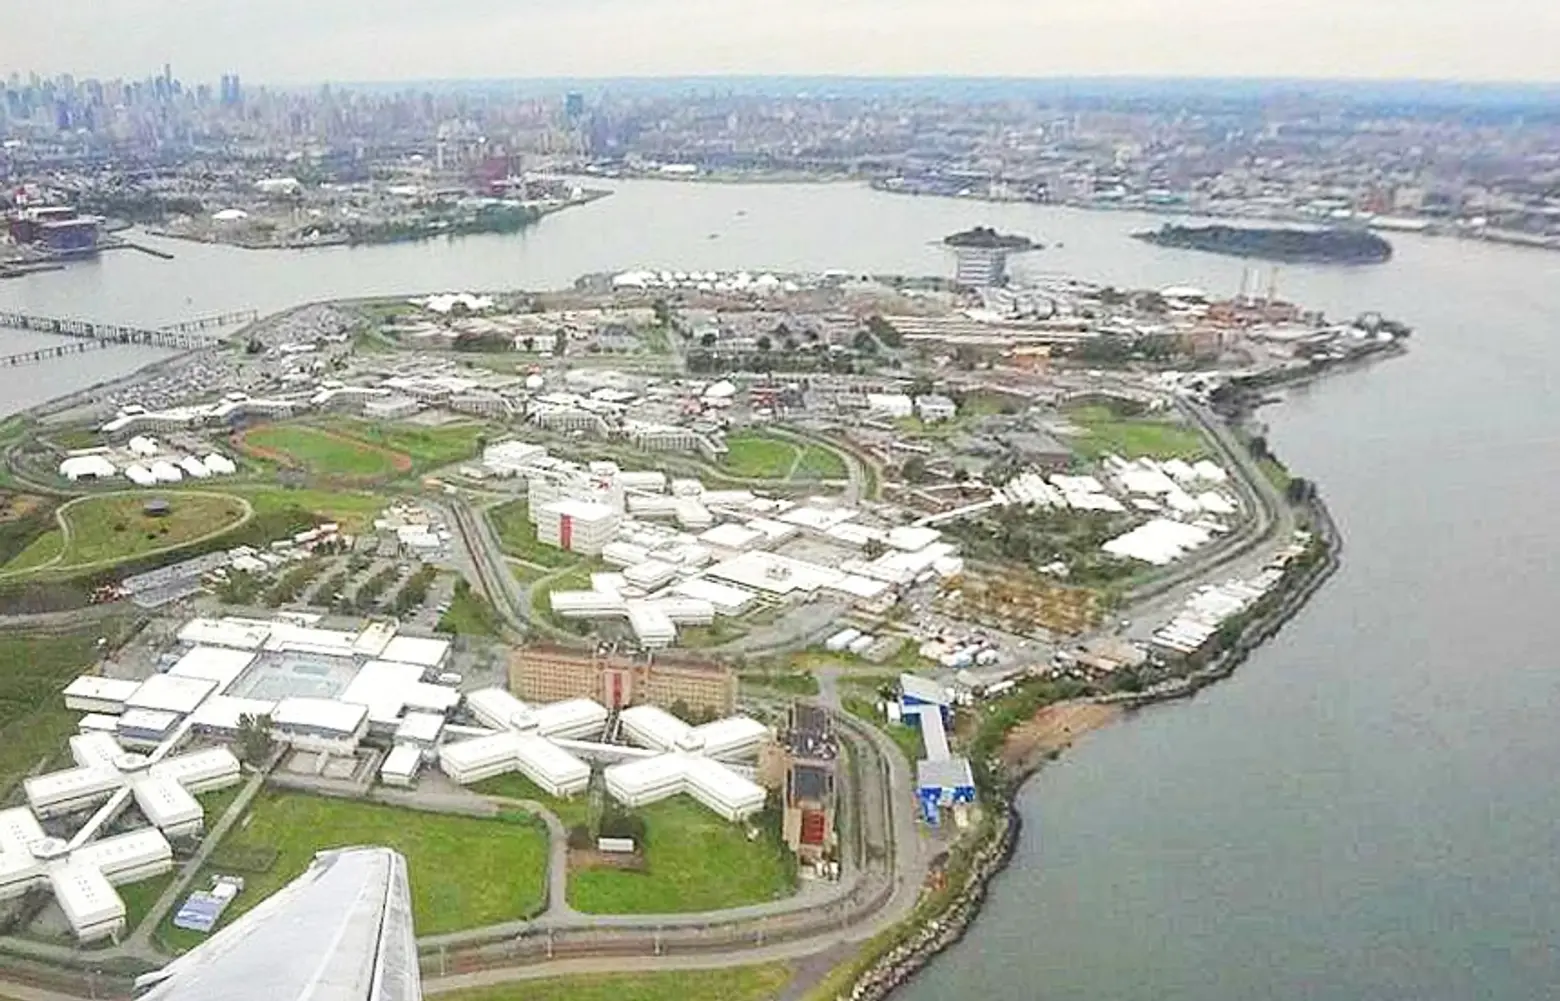 City Planning Commission approves plan to build four borough-based jails as Rikers replacement